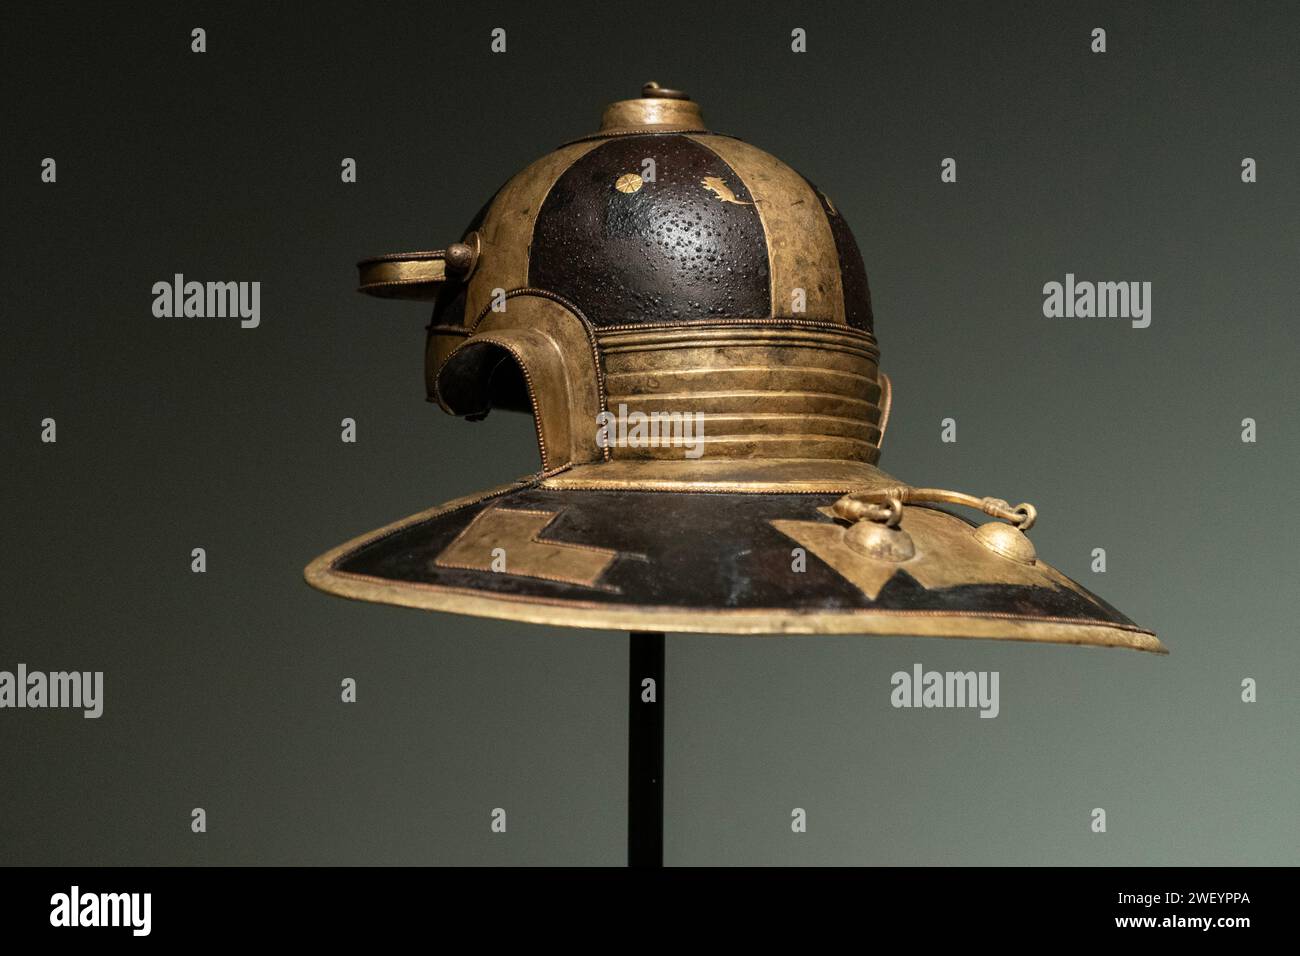 Roman Iron, Brass and Copper Helmet from 2nd century A.D. from Mougins Museum of Classical Art Collection seen during press preview ahead of auction on Christie's in New York on January 26, 2024 Stock Photo